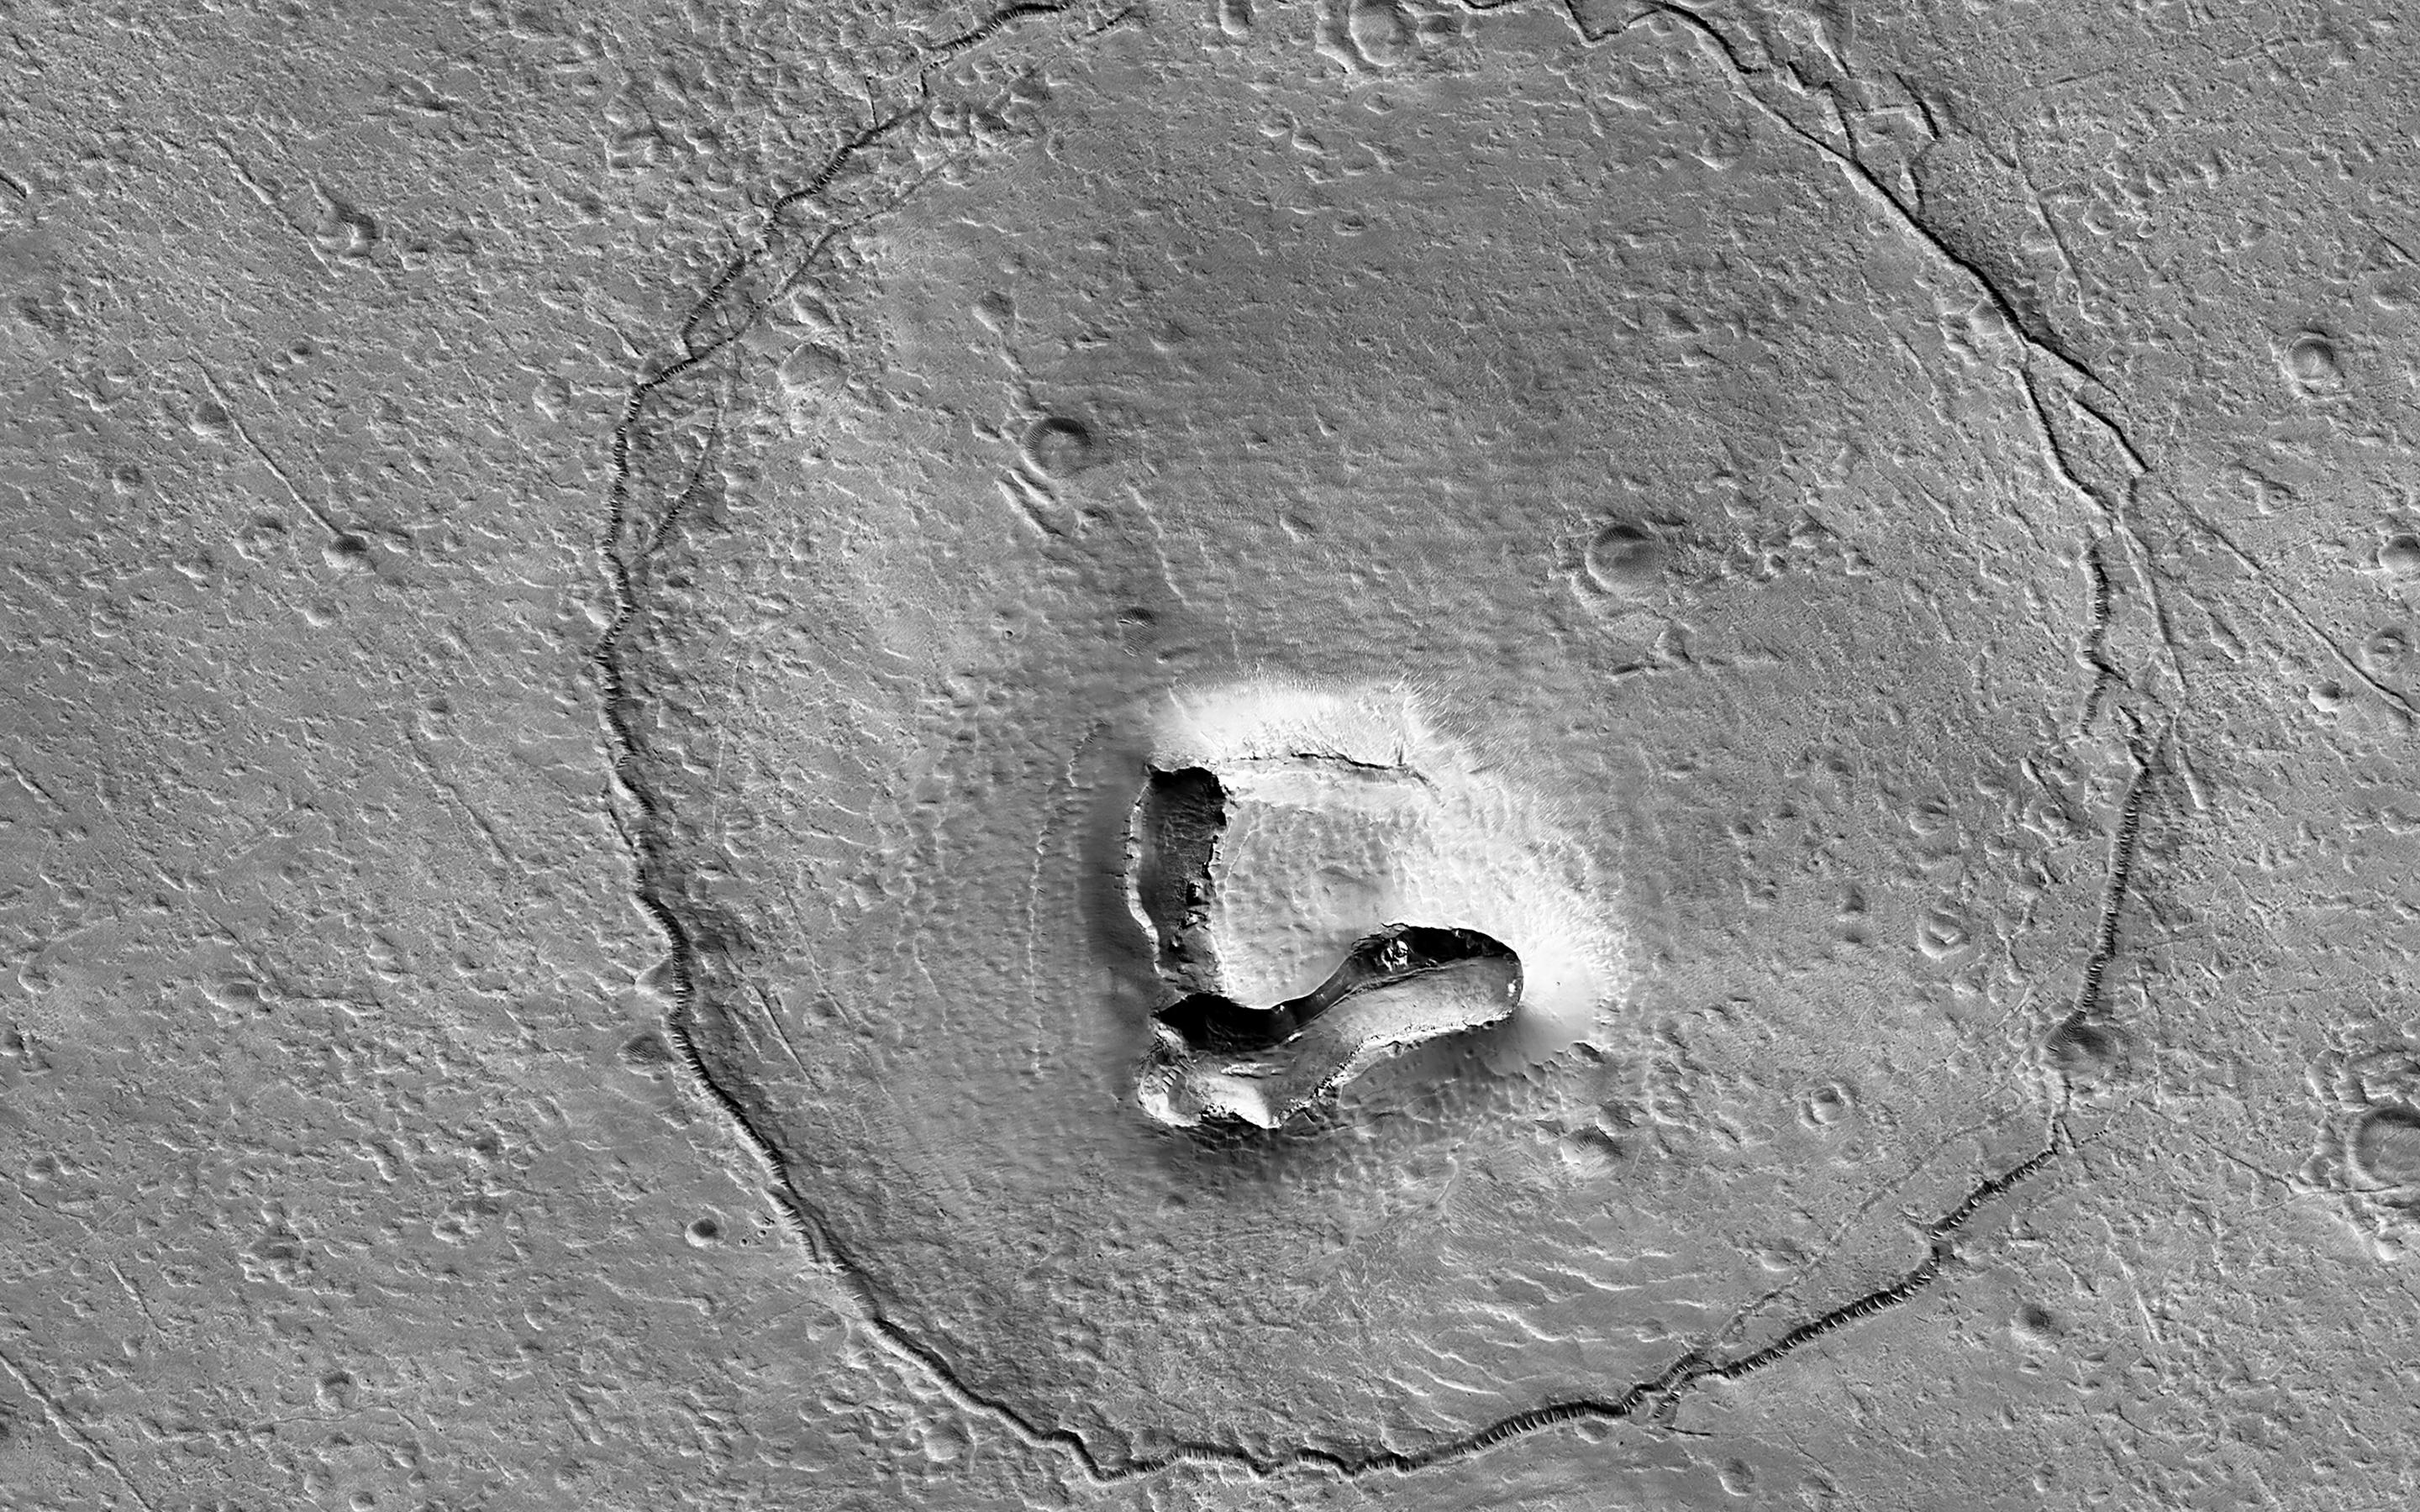 A geographical feature on Mars looks like the face of a bear in this black and white image acquired by NASA's Mars Reconnaissance Orbiter.